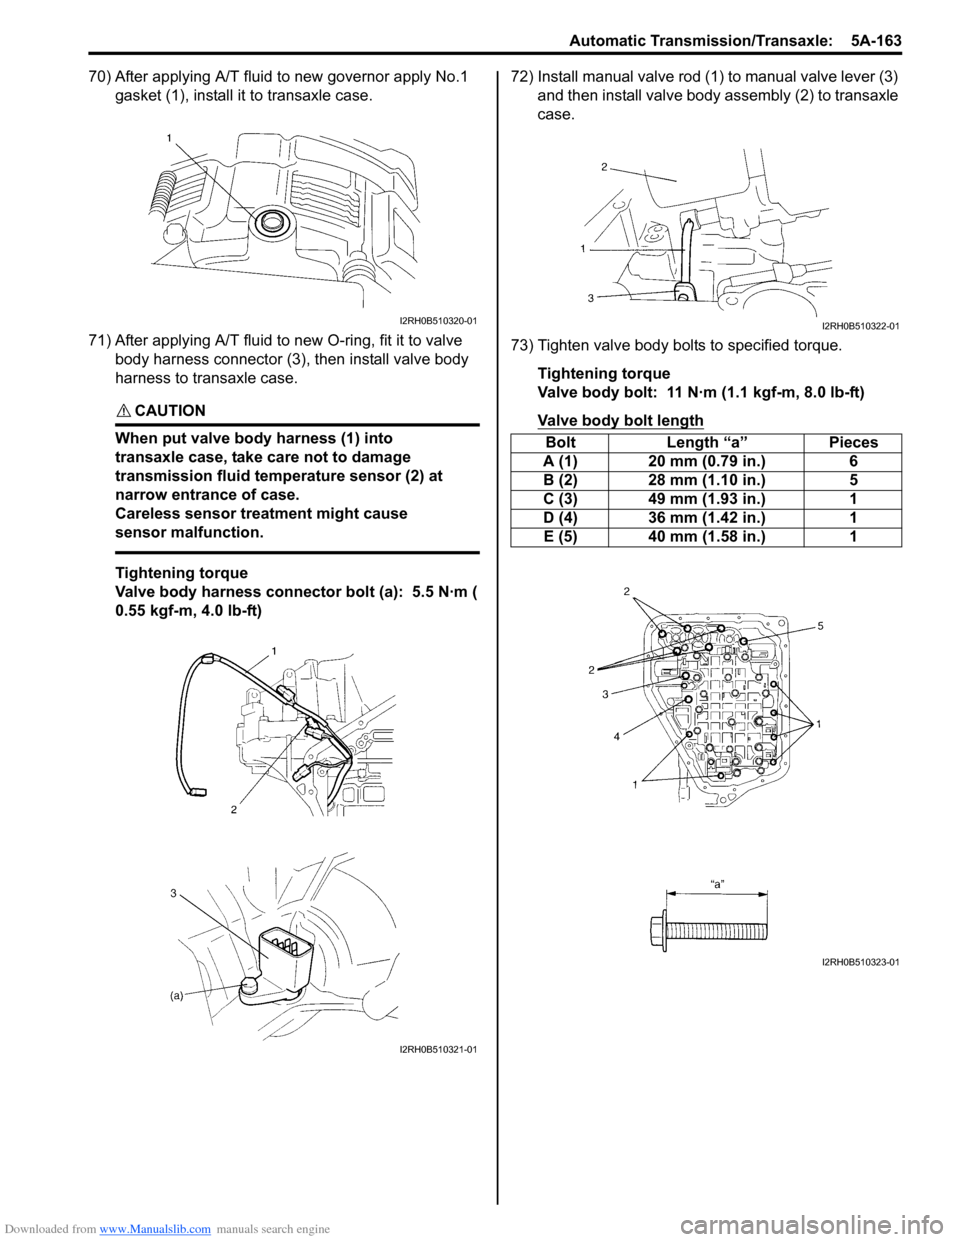 SUZUKI SWIFT 2008 2.G Service Service Manual Downloaded from www.Manualslib.com manuals search engine Automatic Transmission/Transaxle:  5A-163
70) After applying A/T fluid to new governor apply No.1 gasket (1), install it  to transaxle case.
71